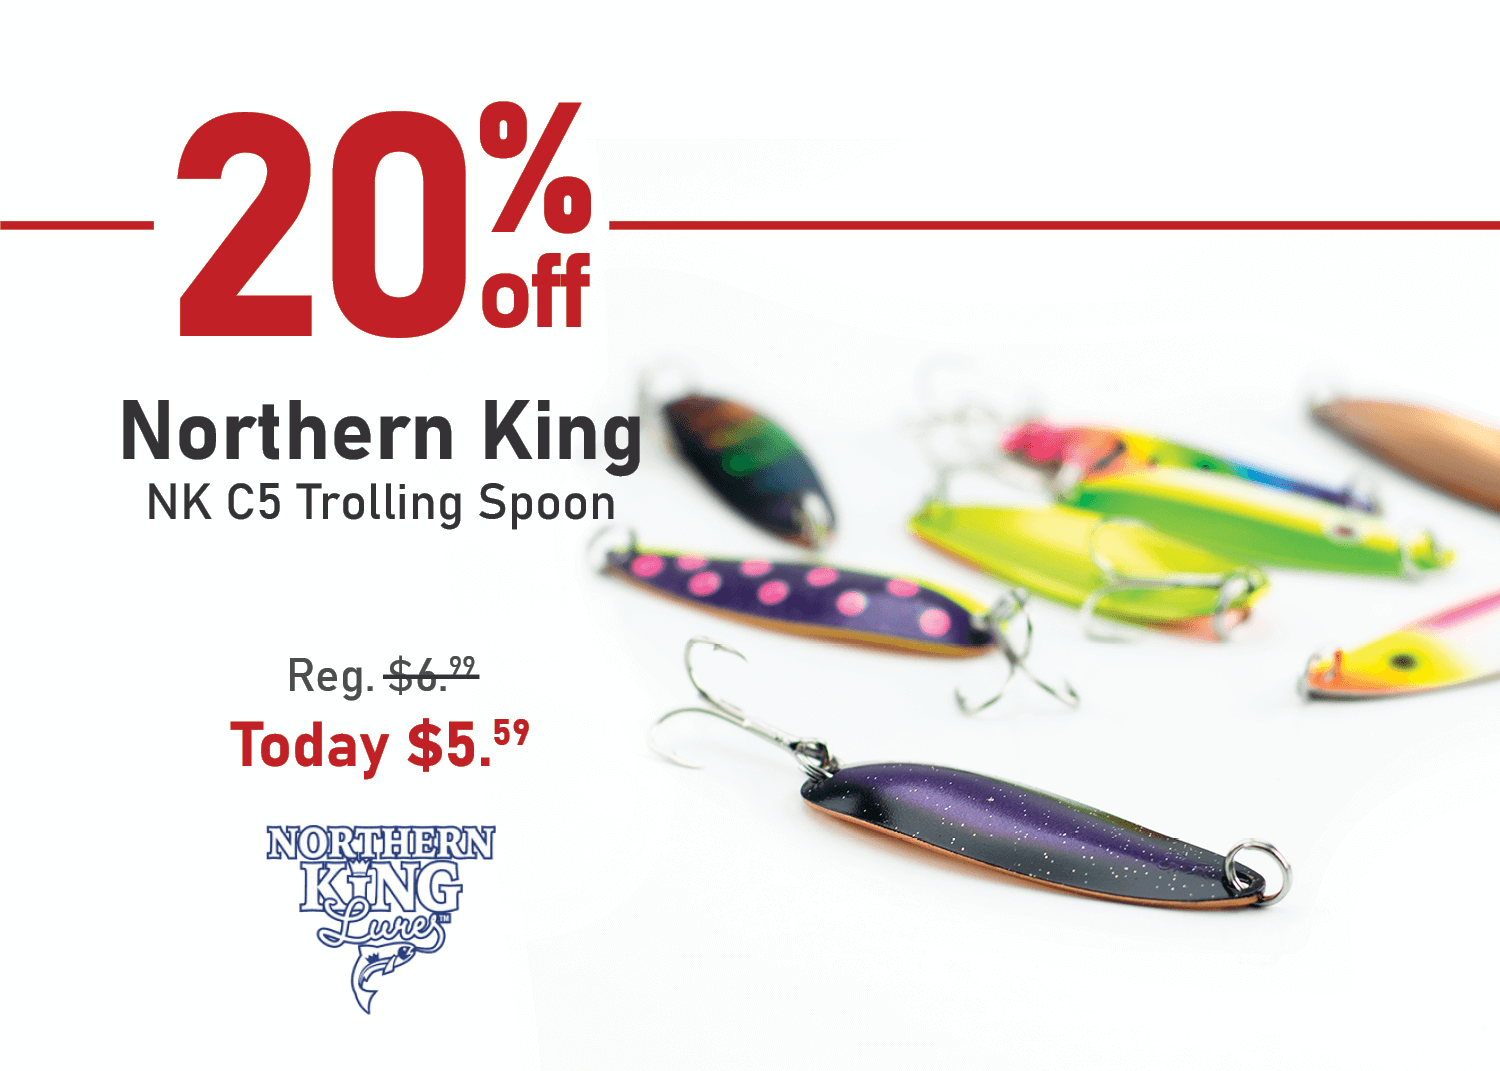 Save 20% on the Northern King NK C5 Trolling Spoon